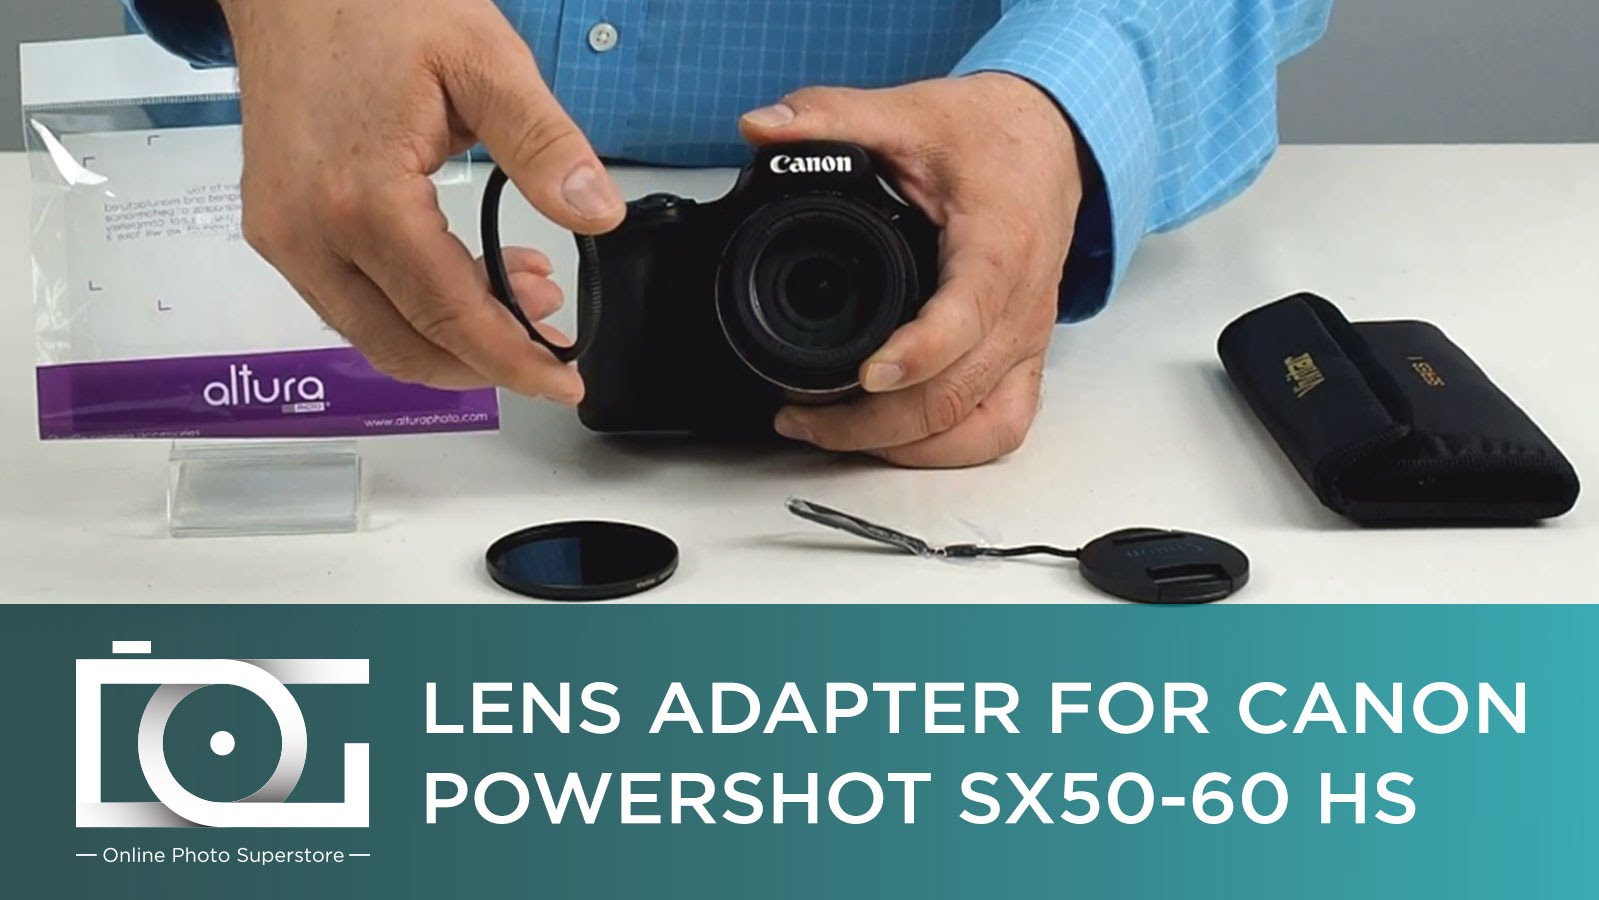 TUTORIAL | How To Attach an Adapter Ring to CANON PowerShot Cameras| Video